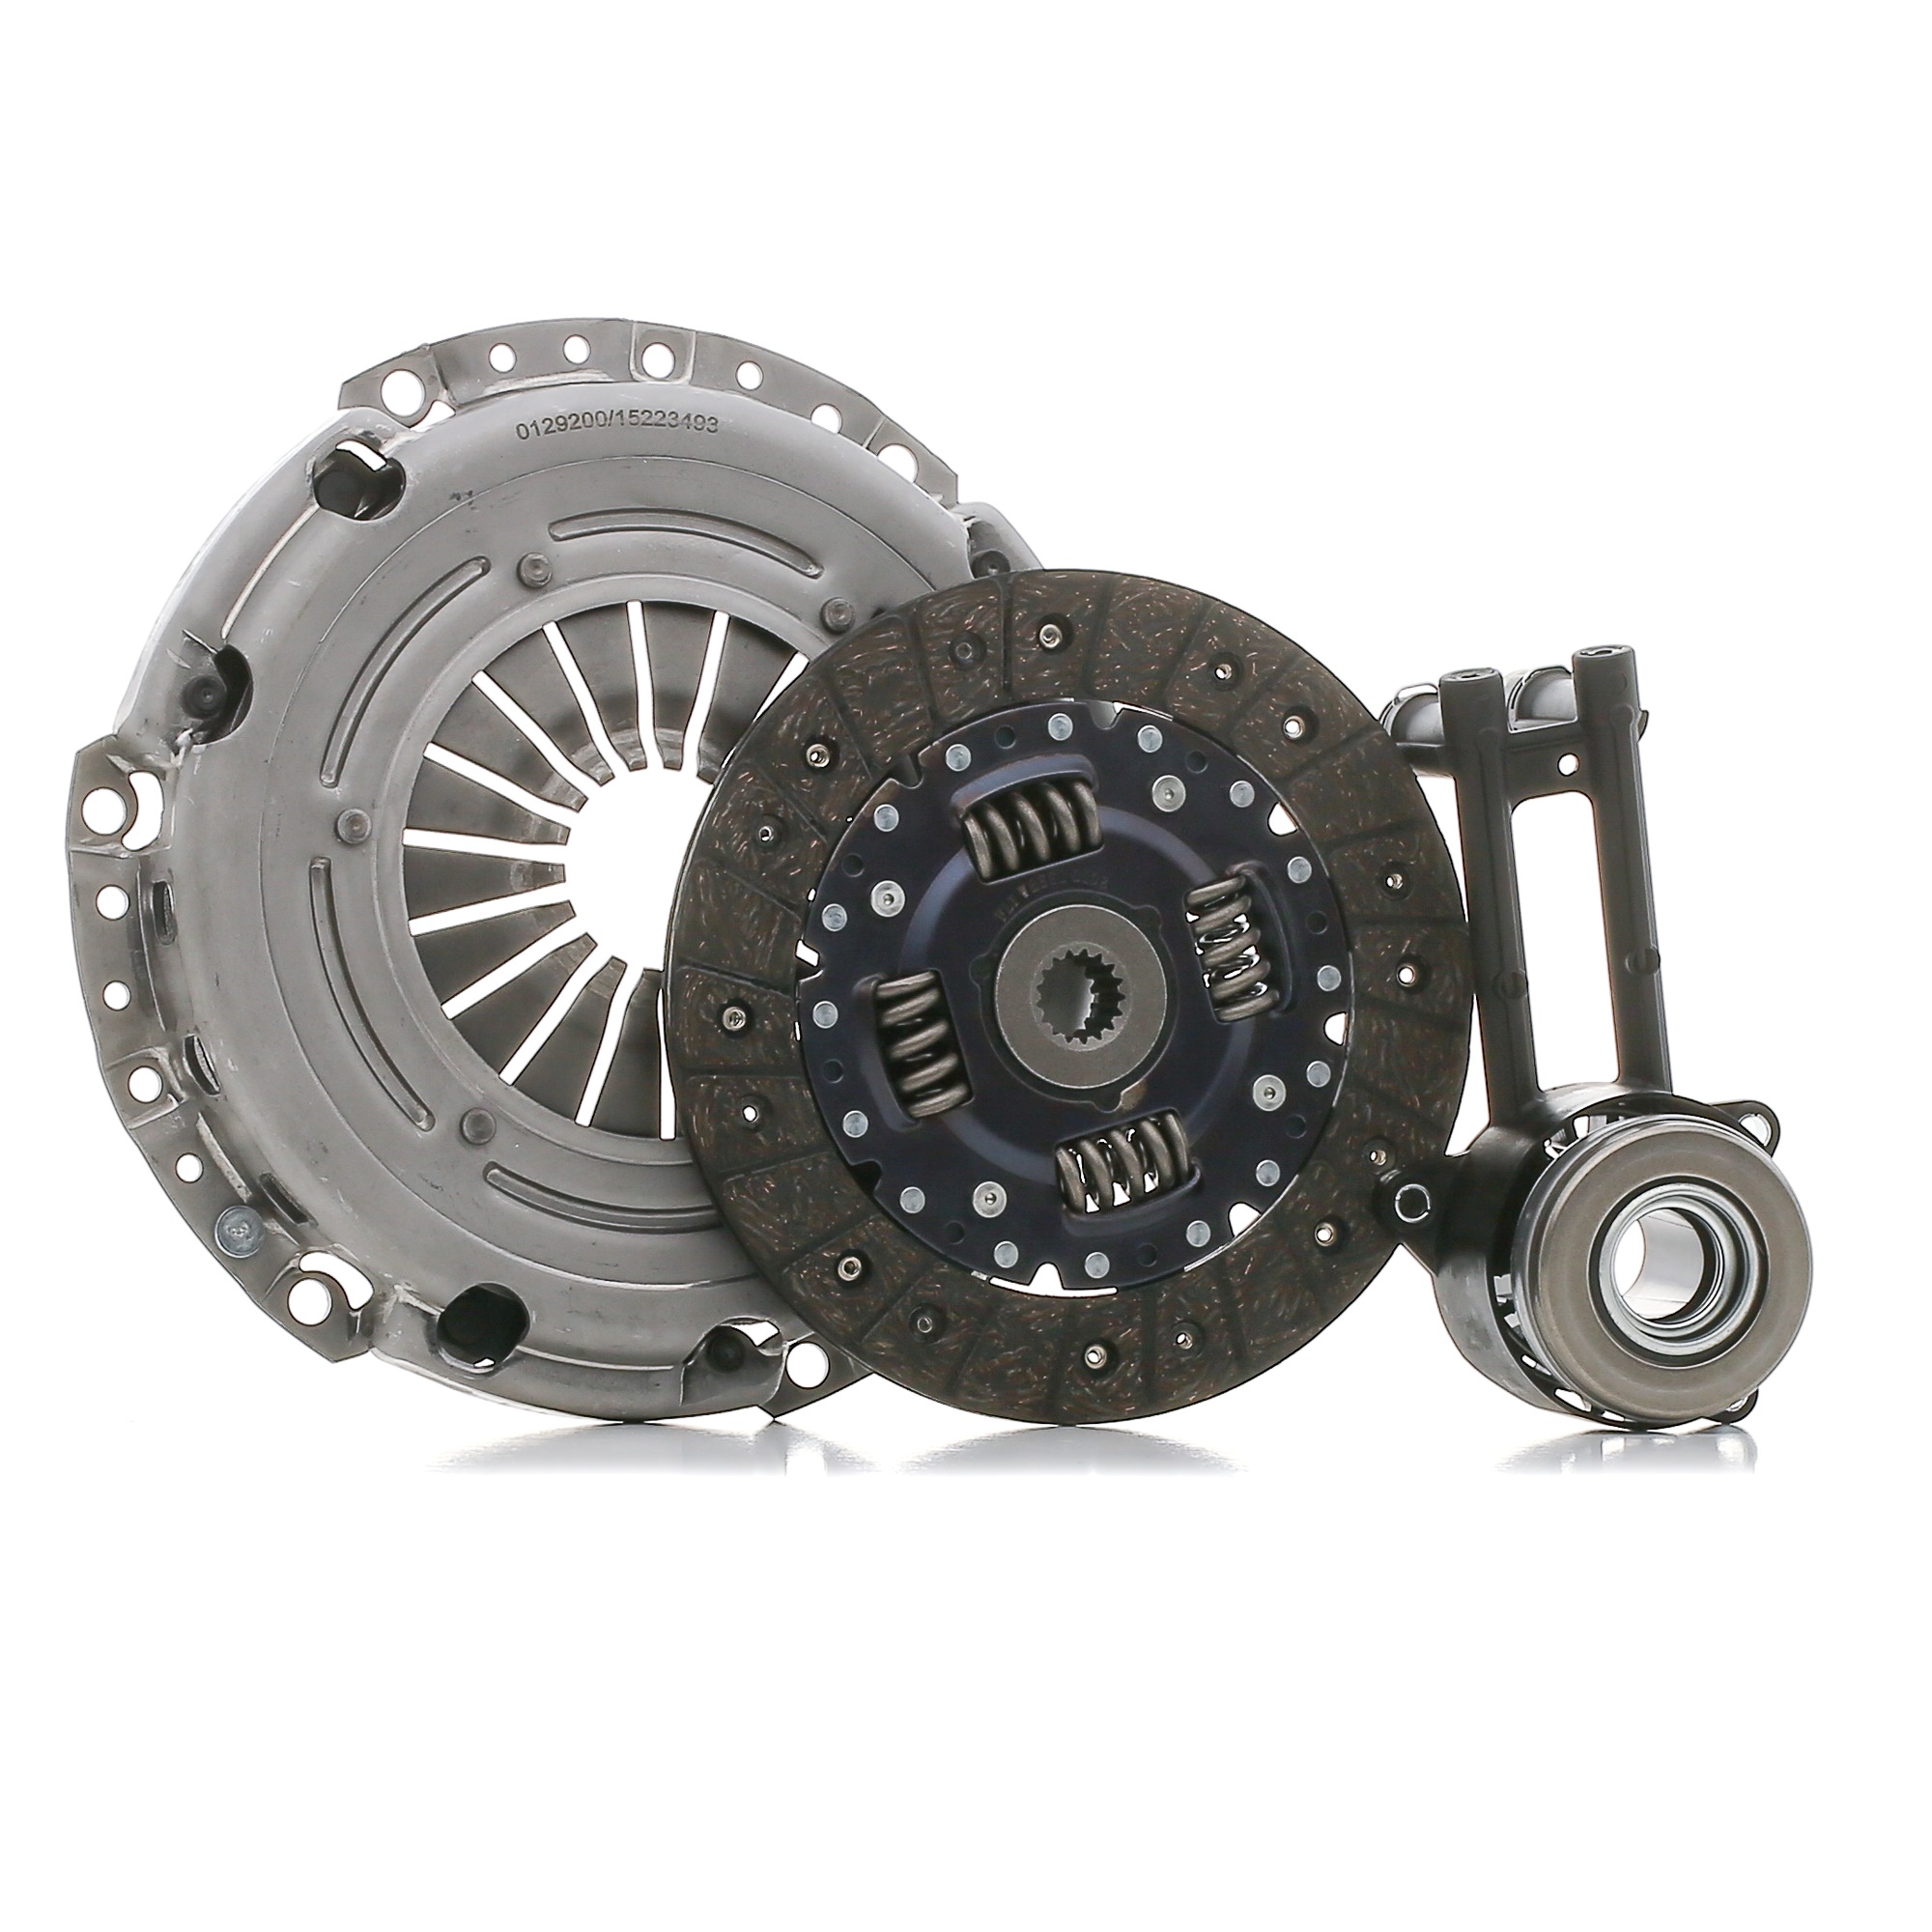 STARK SKCK-0100417 Clutch kit three-piece, with clutch pressure plate, with clutch release bearing, with clutch disc, 190mm